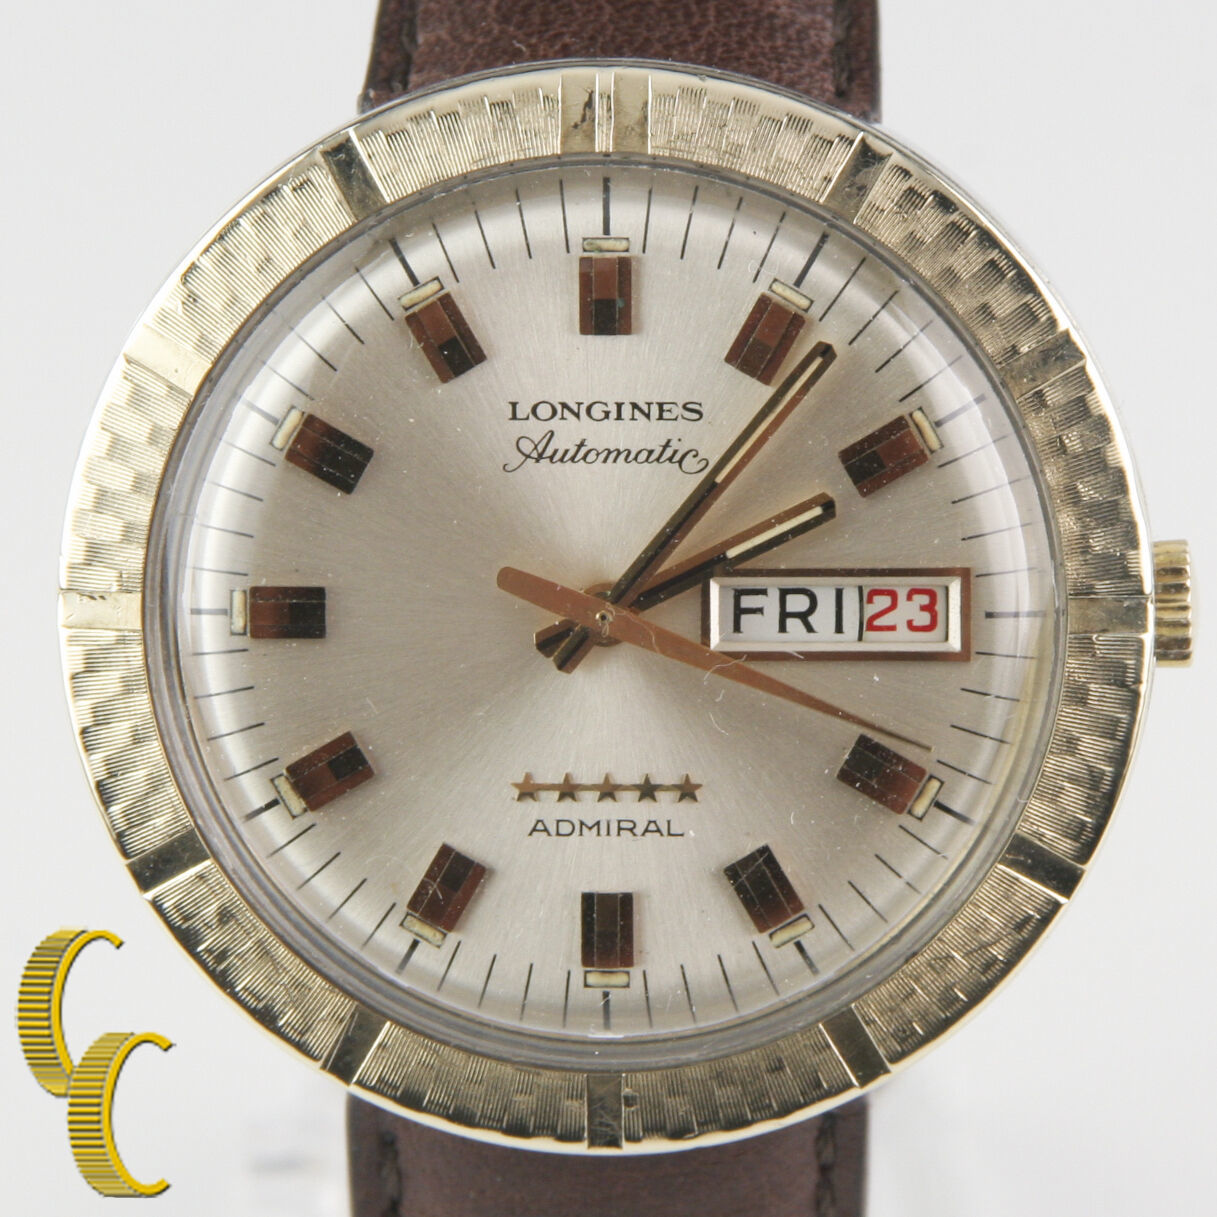 Longines Admiral 10k Gold Filled Automatic Day/Date Watch w/ Leather Band #508 - $1,039.54